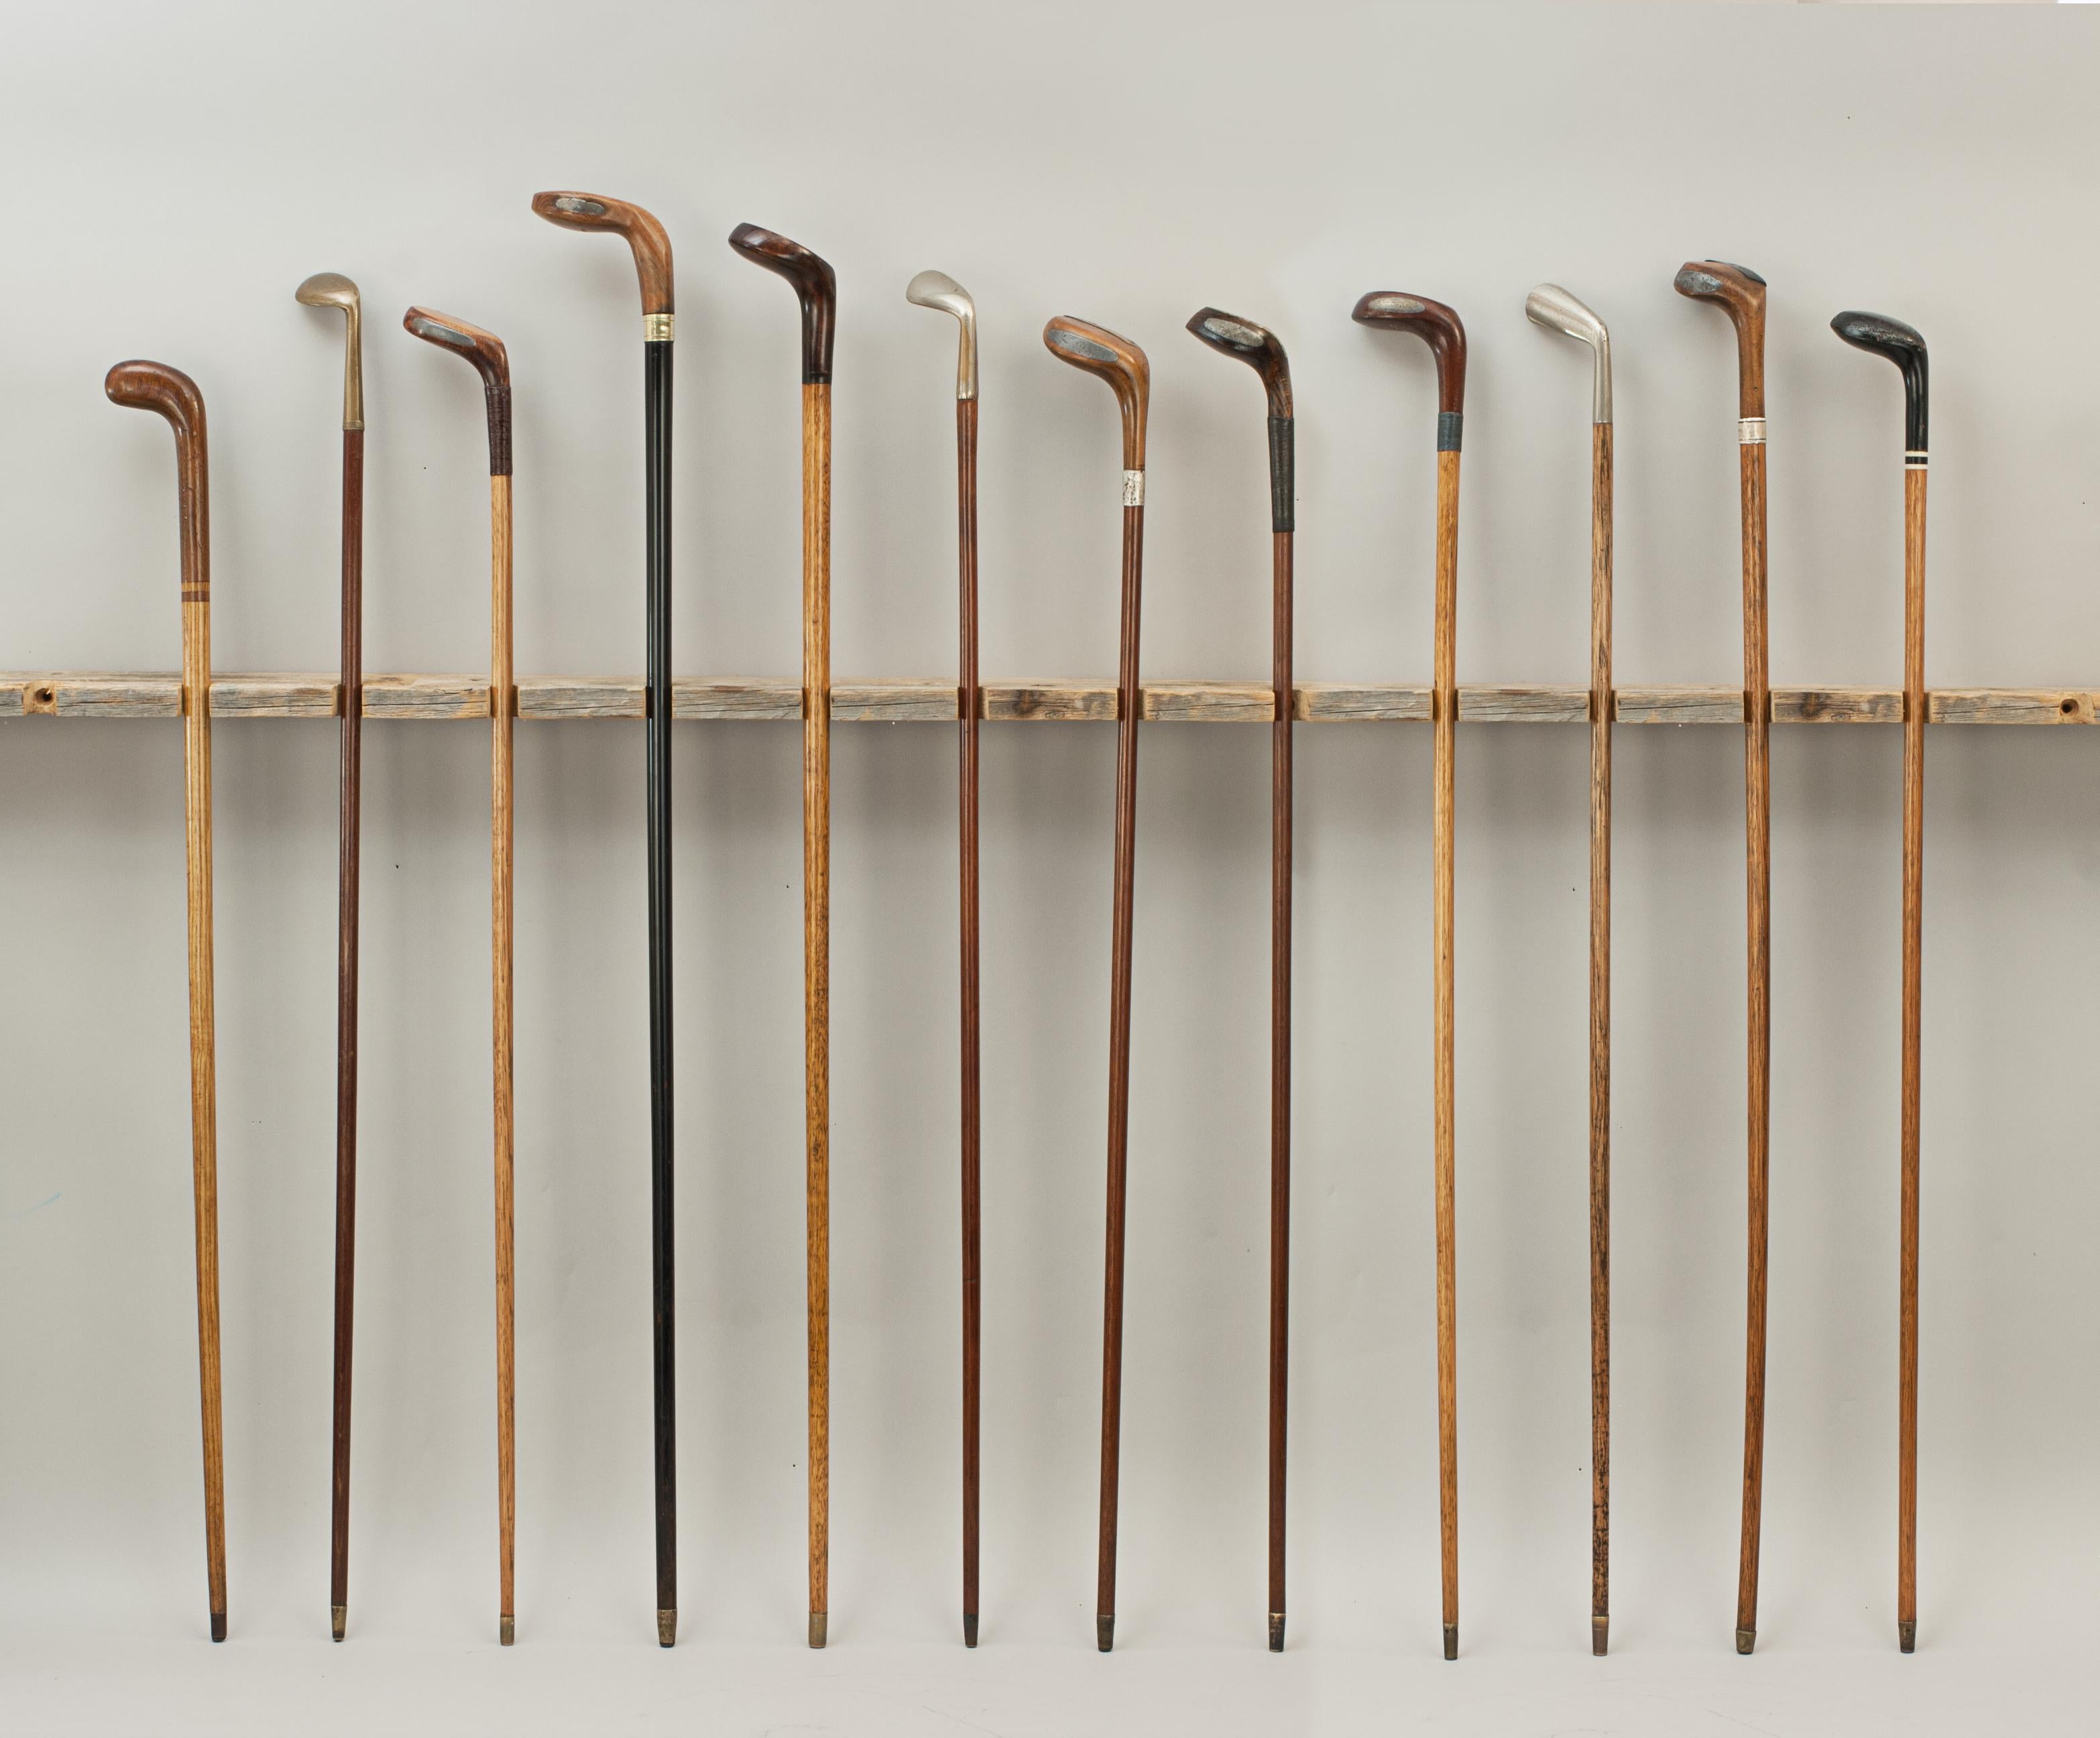 Twelve antique golf club walking sticks, Sunday Clubs.
A desirable collection of walking canes with the handles fashioned in the shape of a golf club heads. Nine of the walking stick heads are made of wood, three are made of metal and all are with